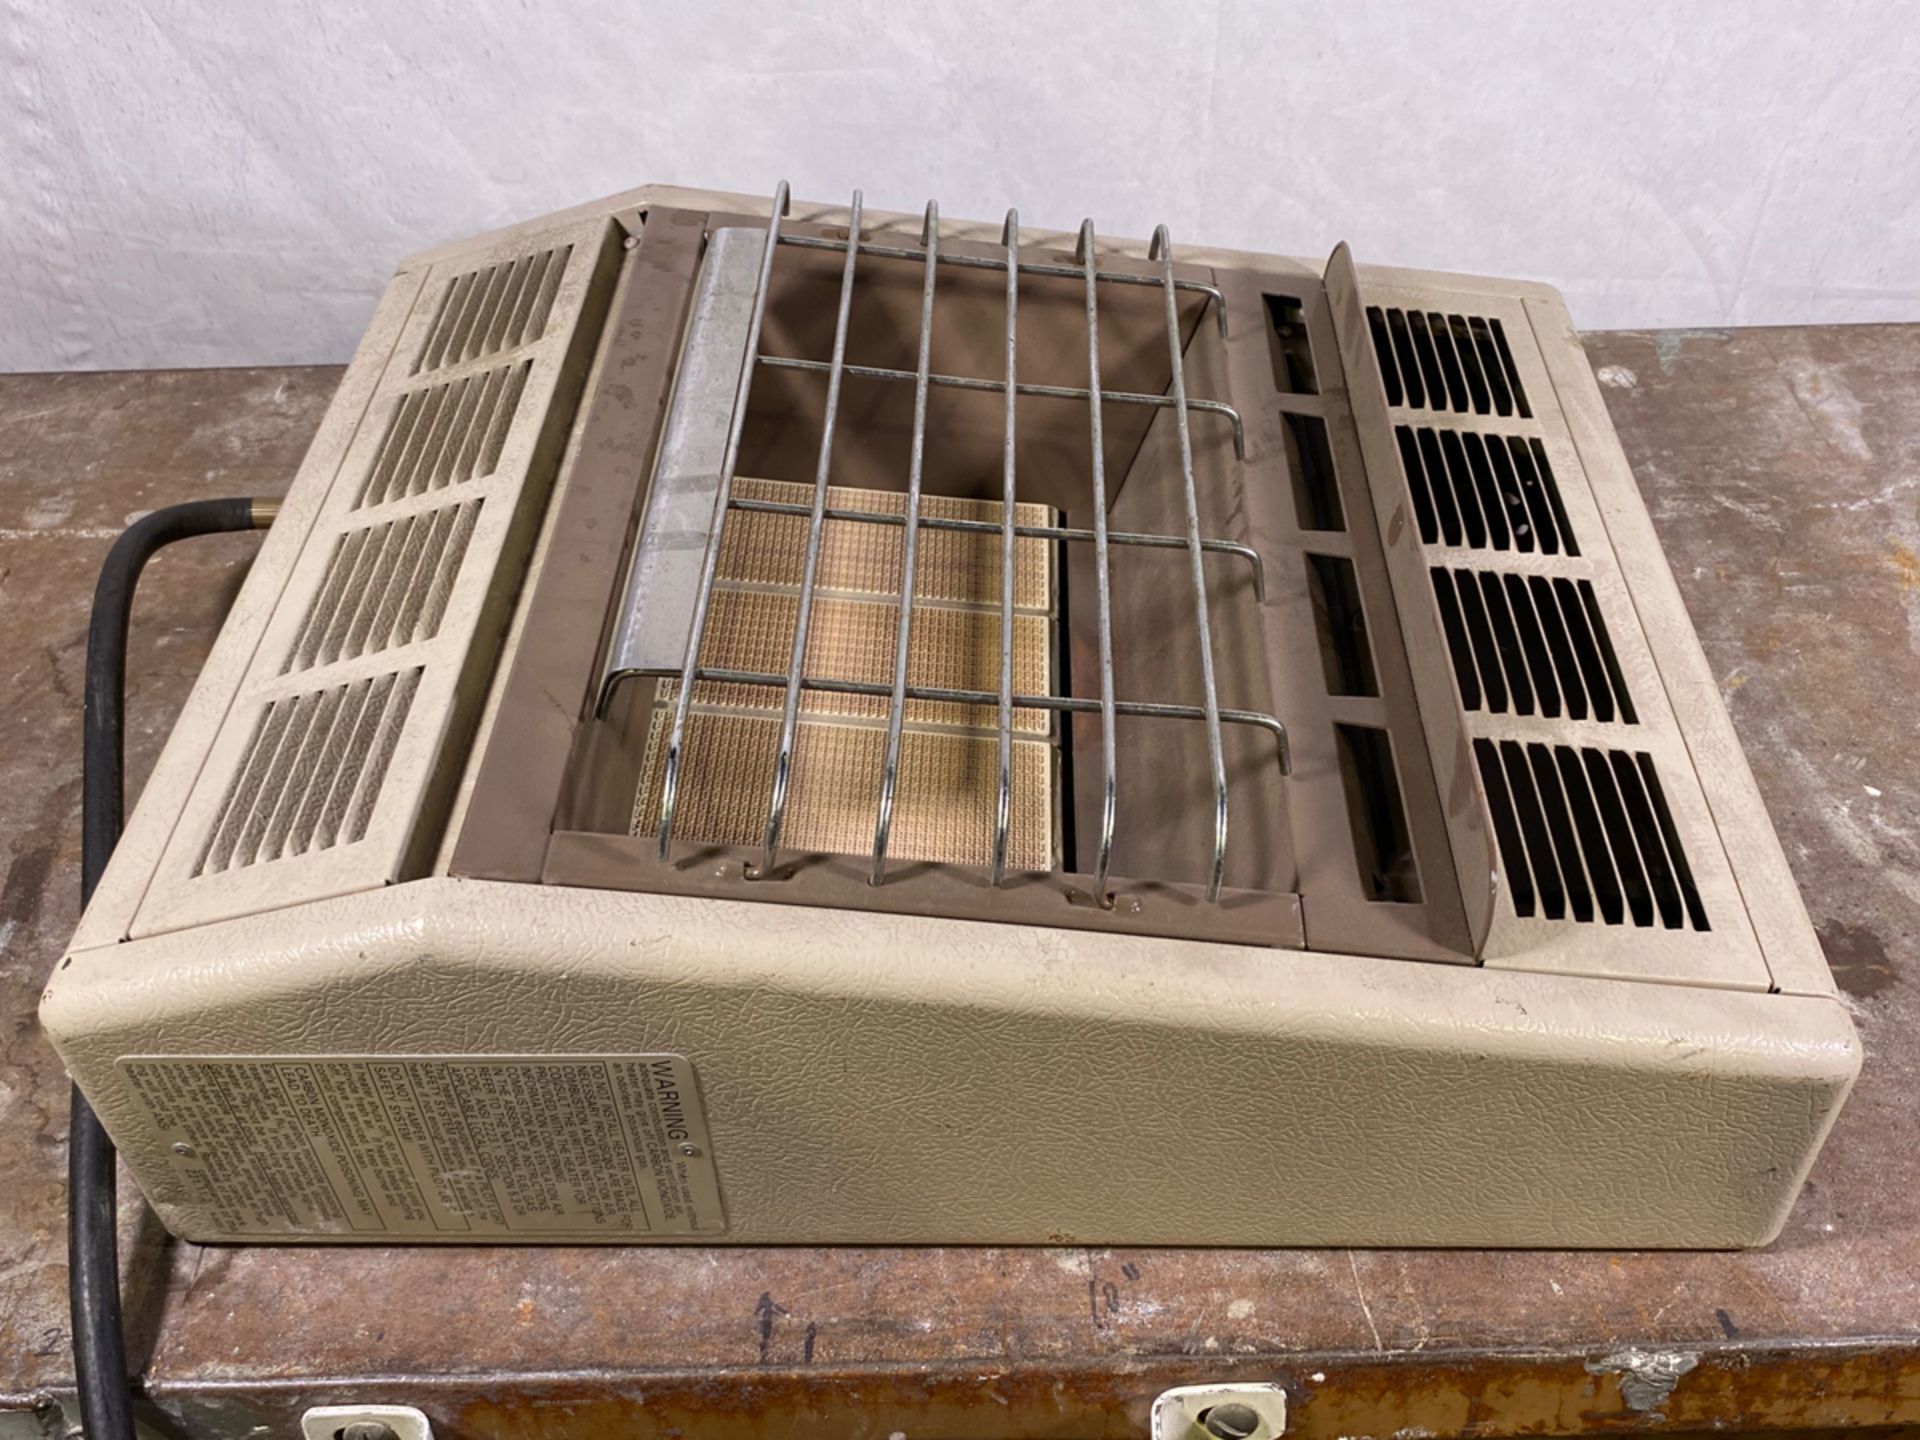 Empire Comfort Systems SR-18W Vent Free 18000 BTU Infrared/Radiant Gas Heater with Manual Control - Image 2 of 7